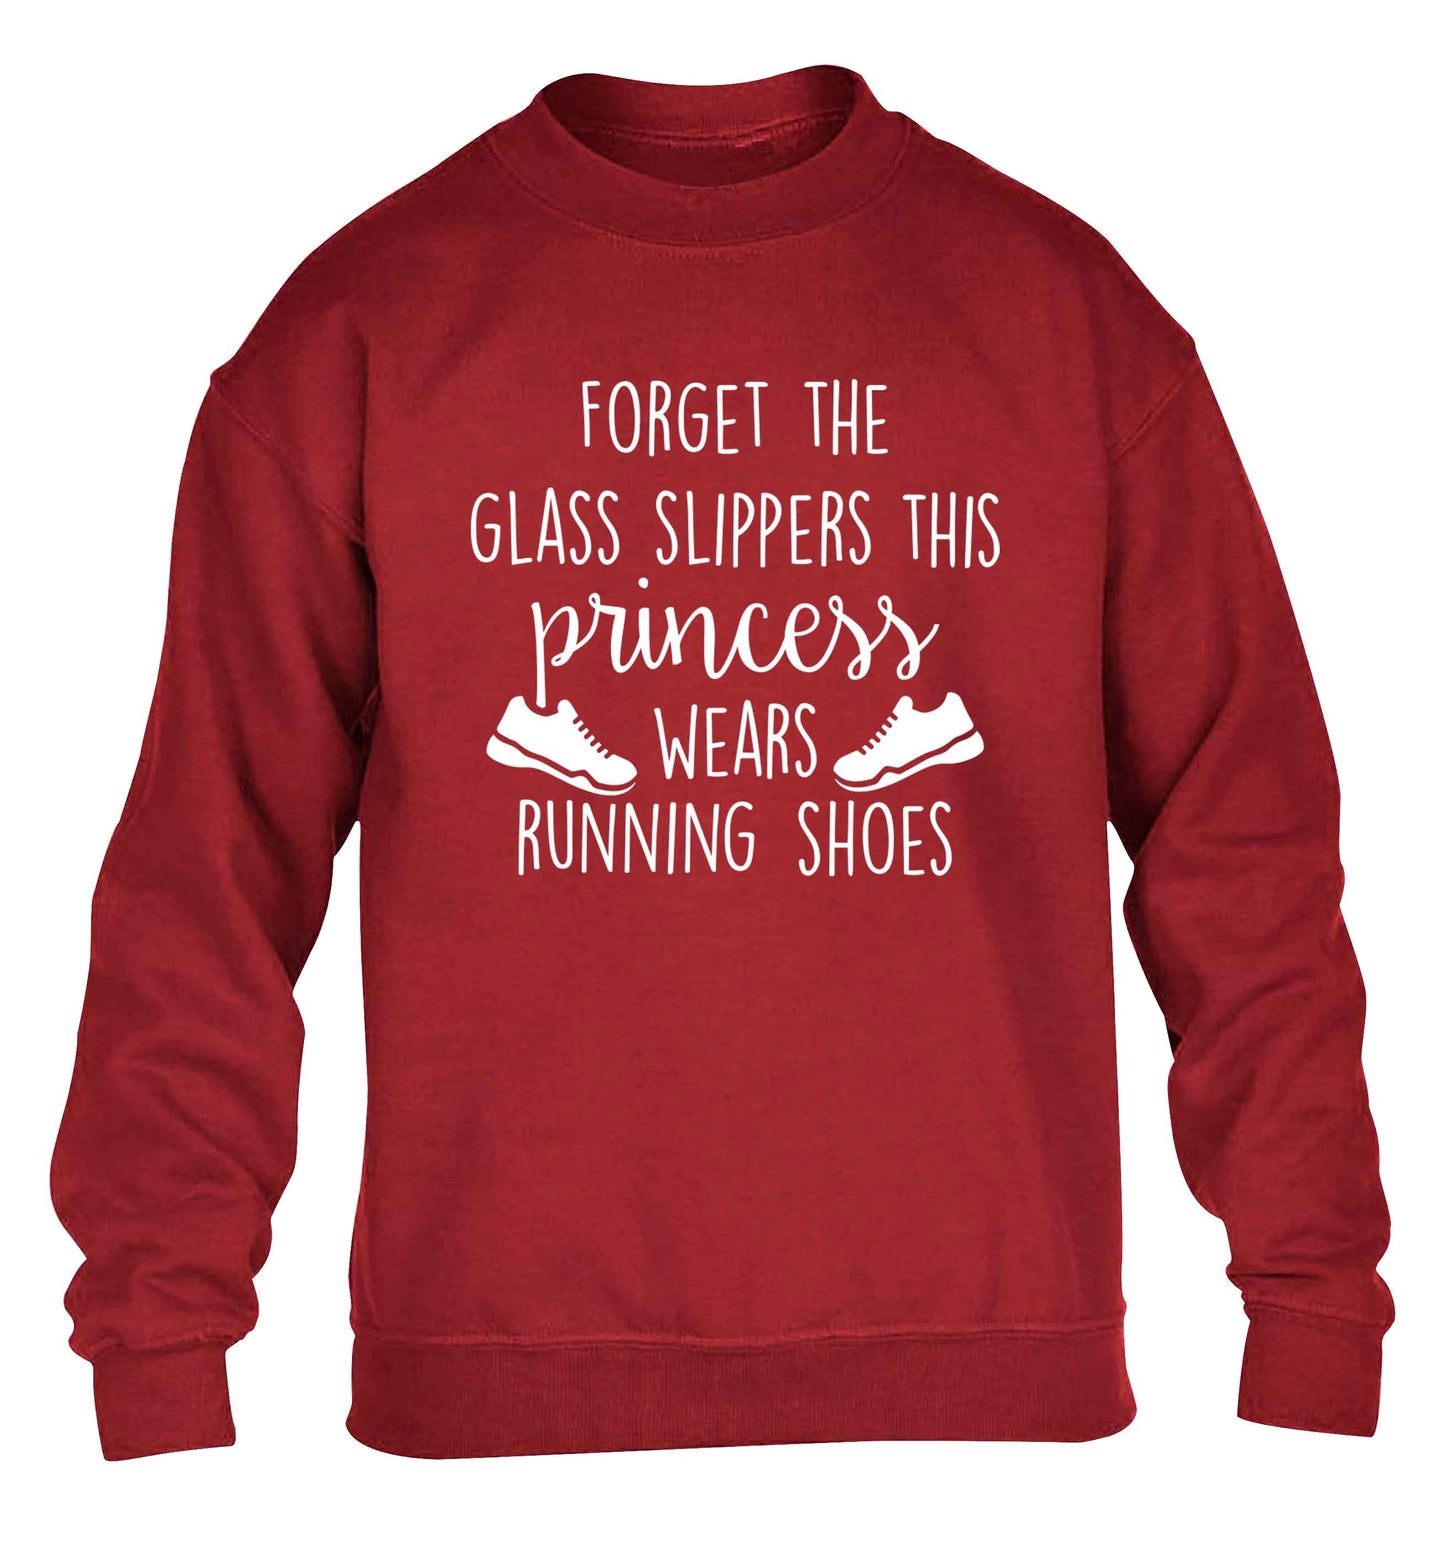 Forget the glass slippers this princess wears running shoes children's grey sweater 12-13 Years